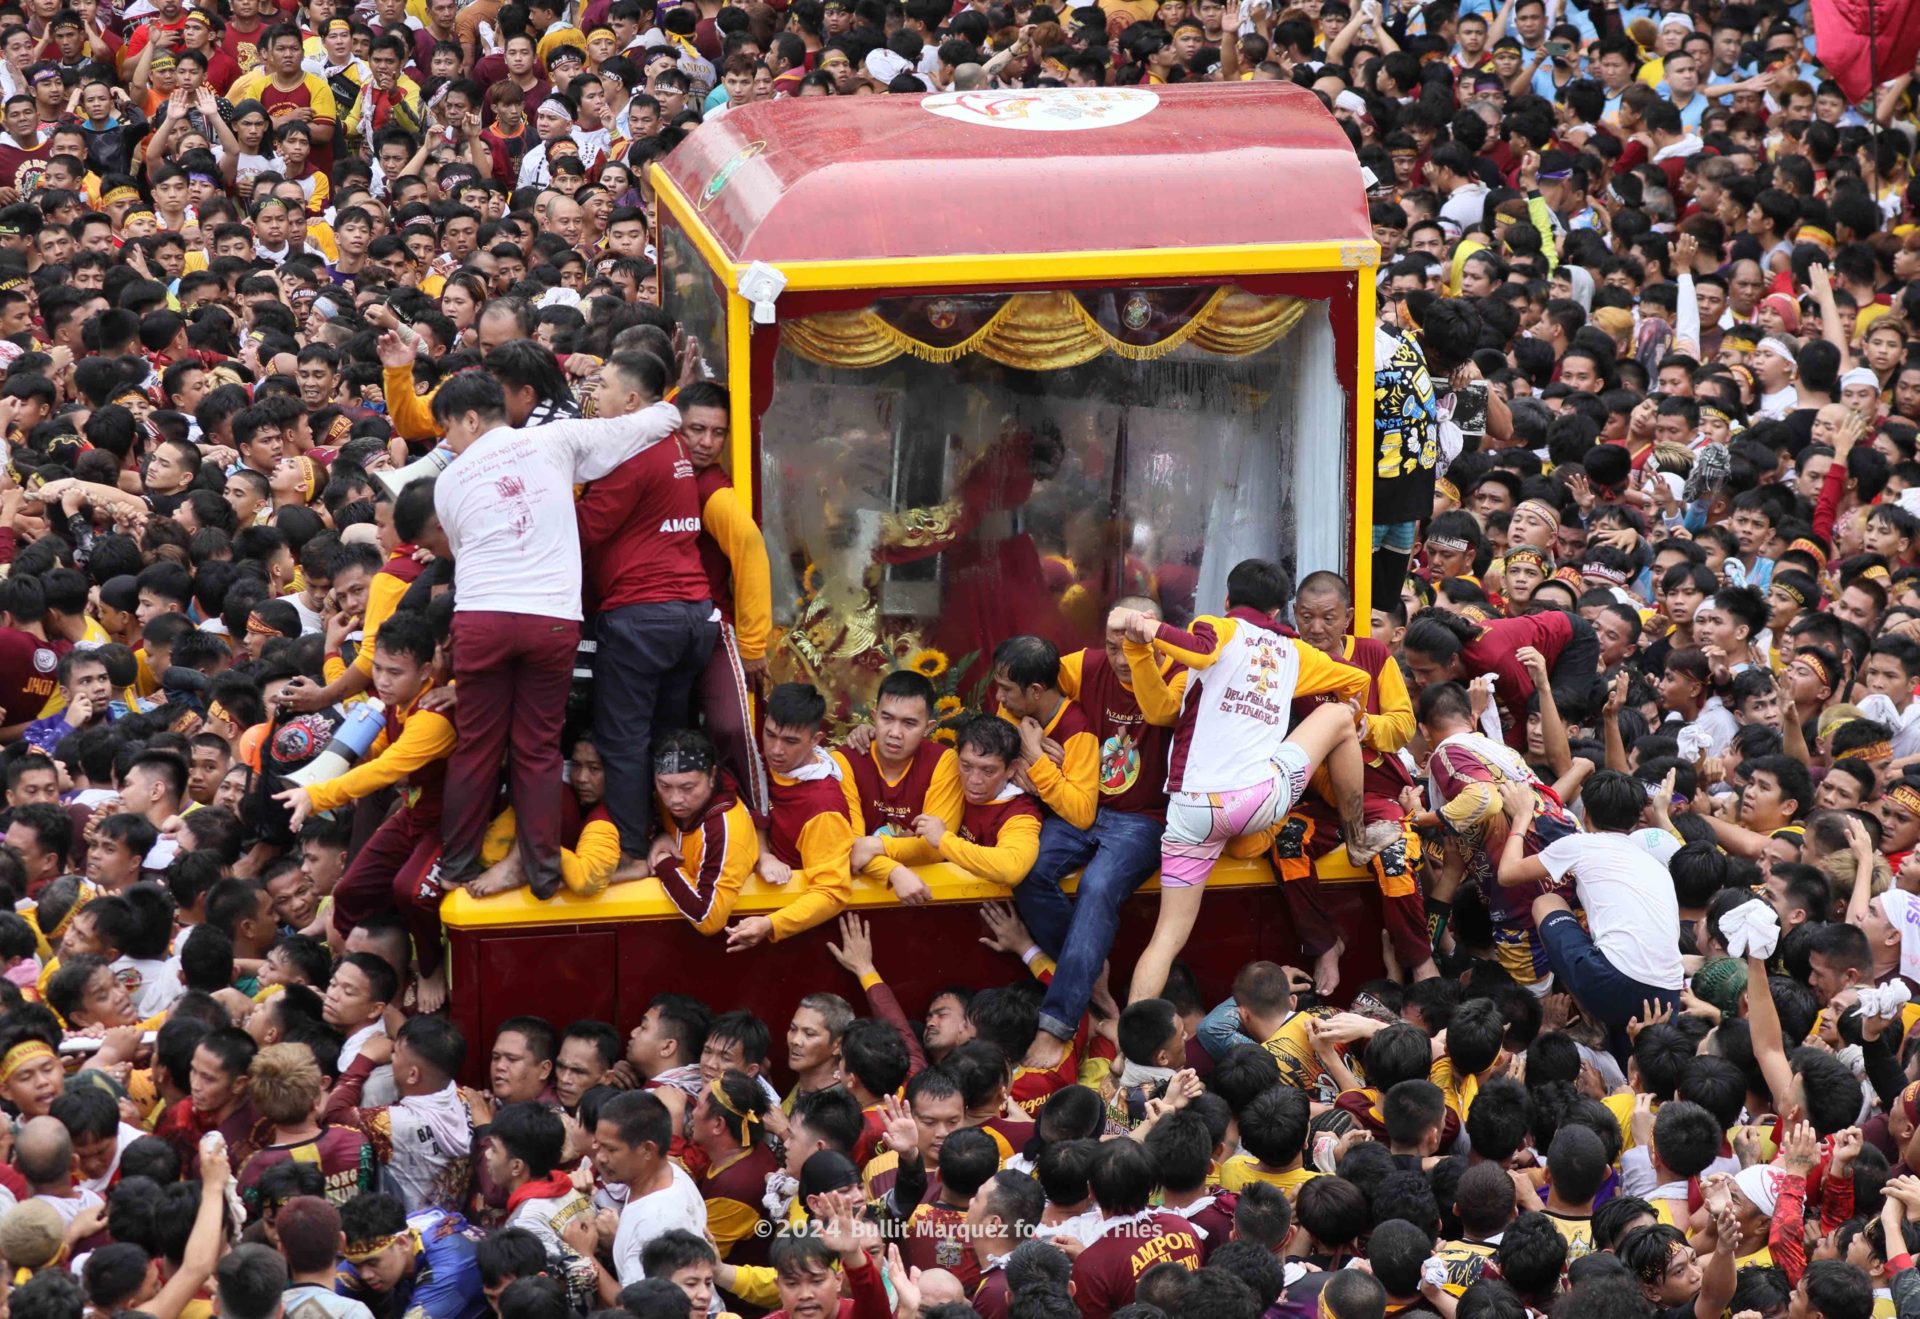 Traslacion 2024: A spectacular display Filipinos’ faith and piety By Bullit Marquez 5/15